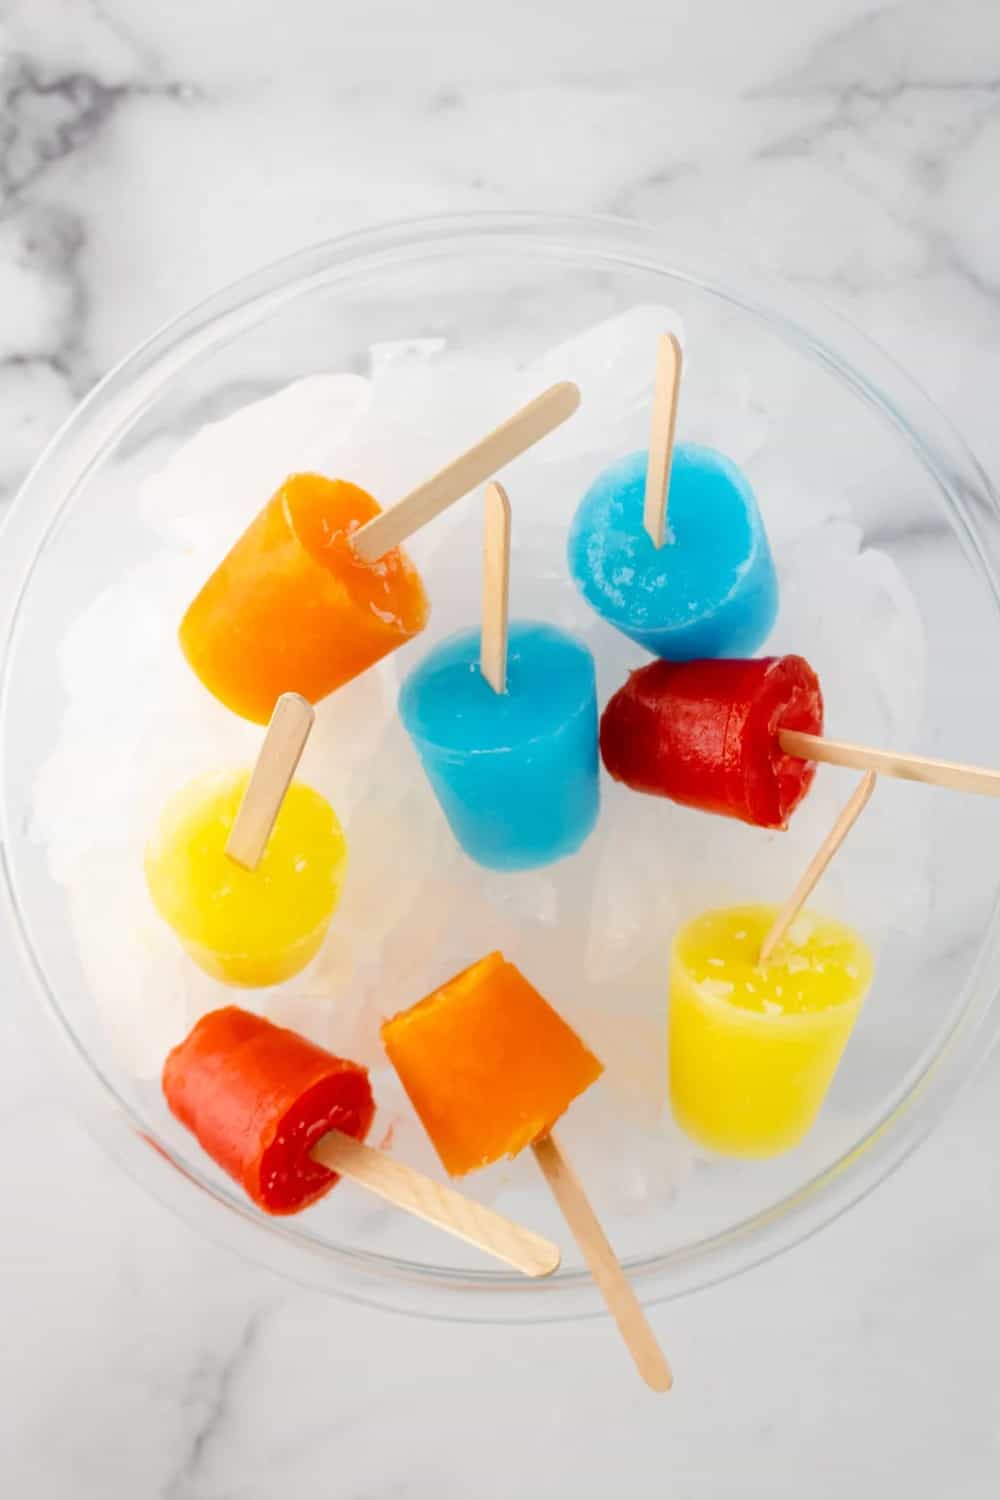 Orange, red, yellow and blue Jello Popsicles.